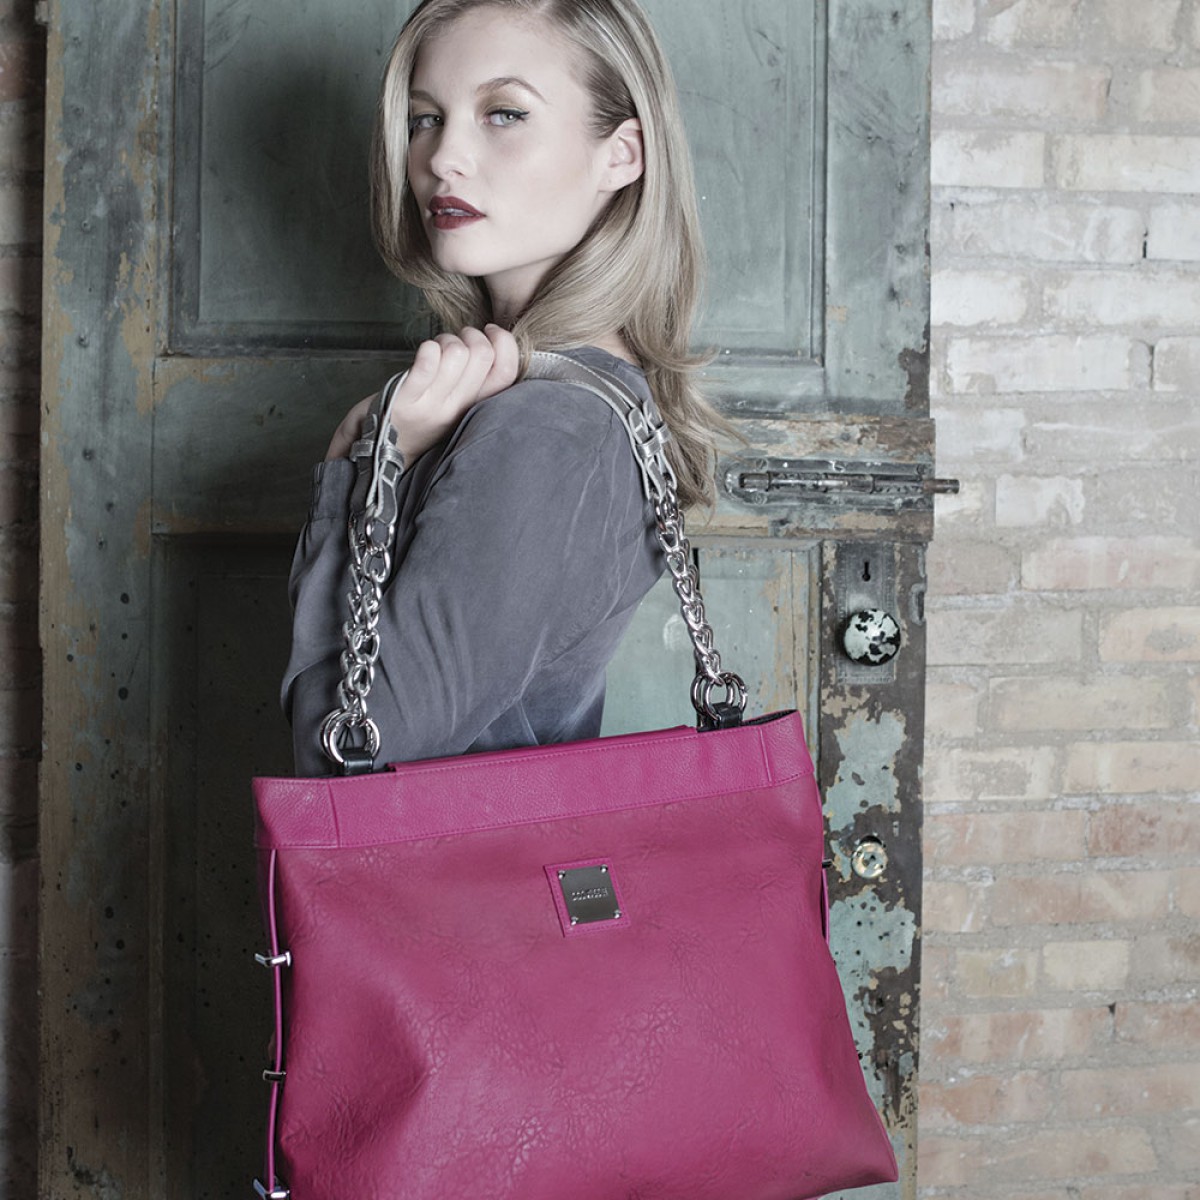 Miche Caracas Classic Handbag Review - The PennyWiseMama